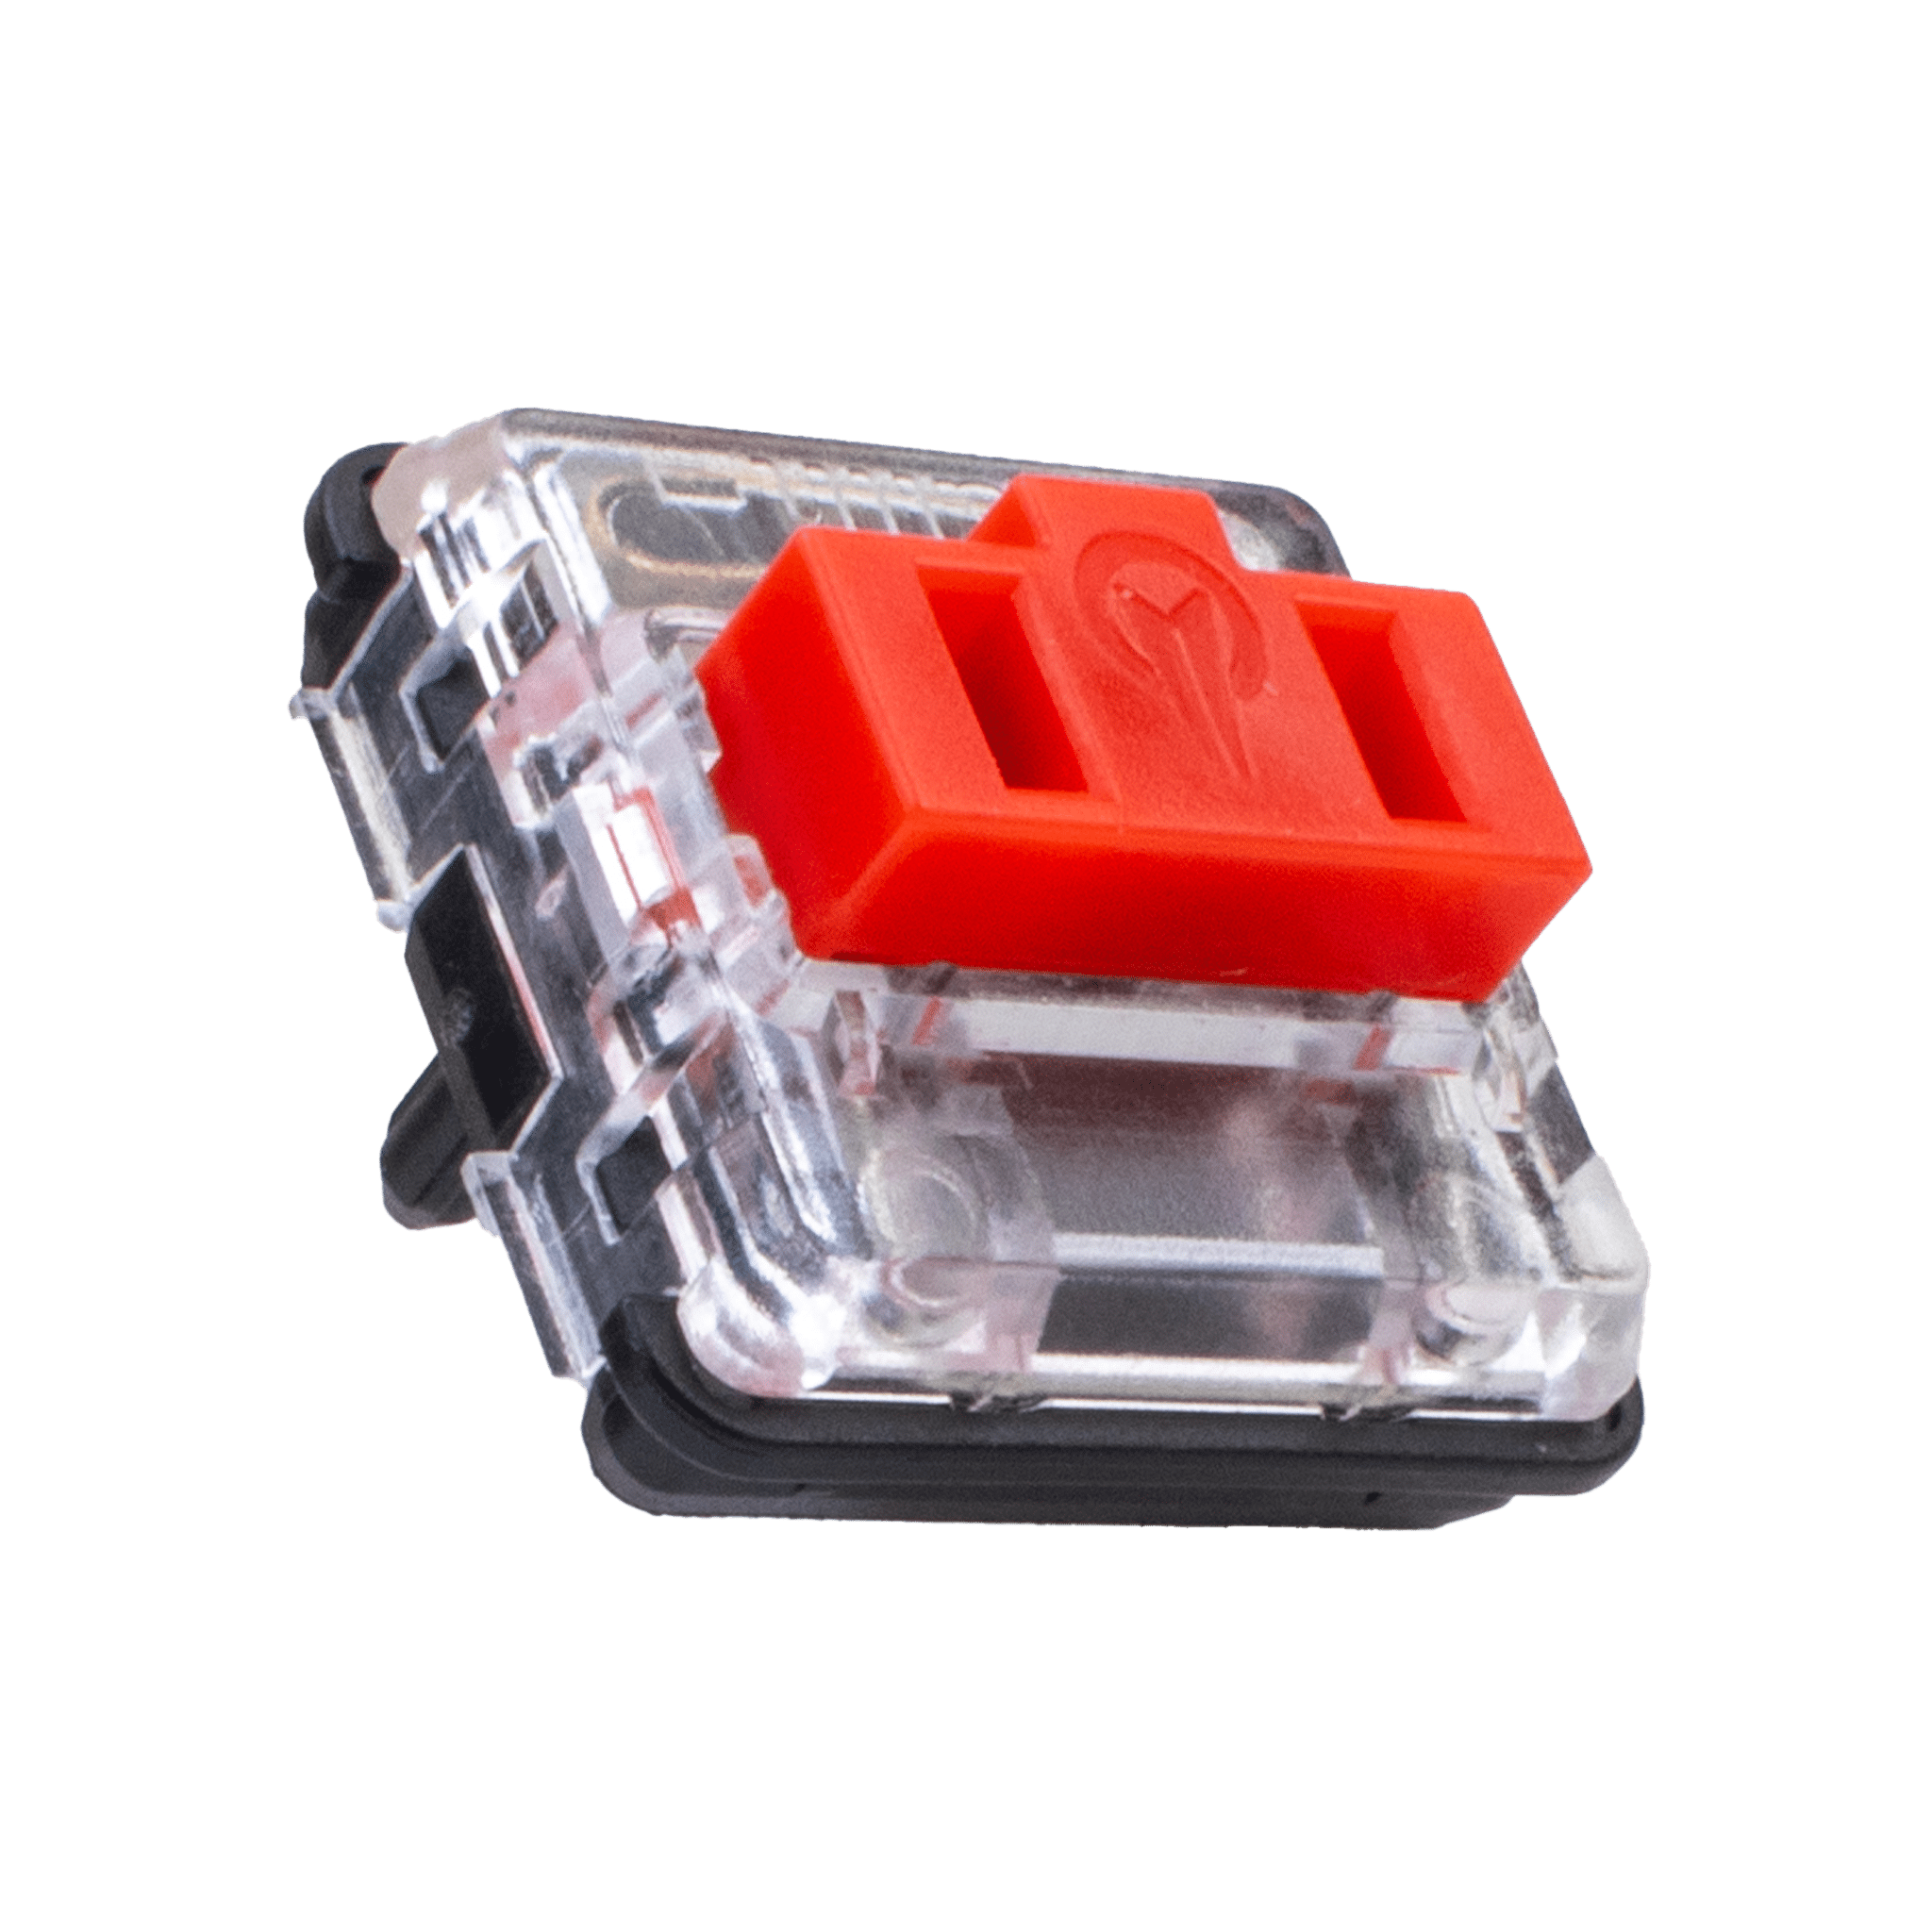 Kailh Low Profile Choc Switches (V1) - Red - Mechboards